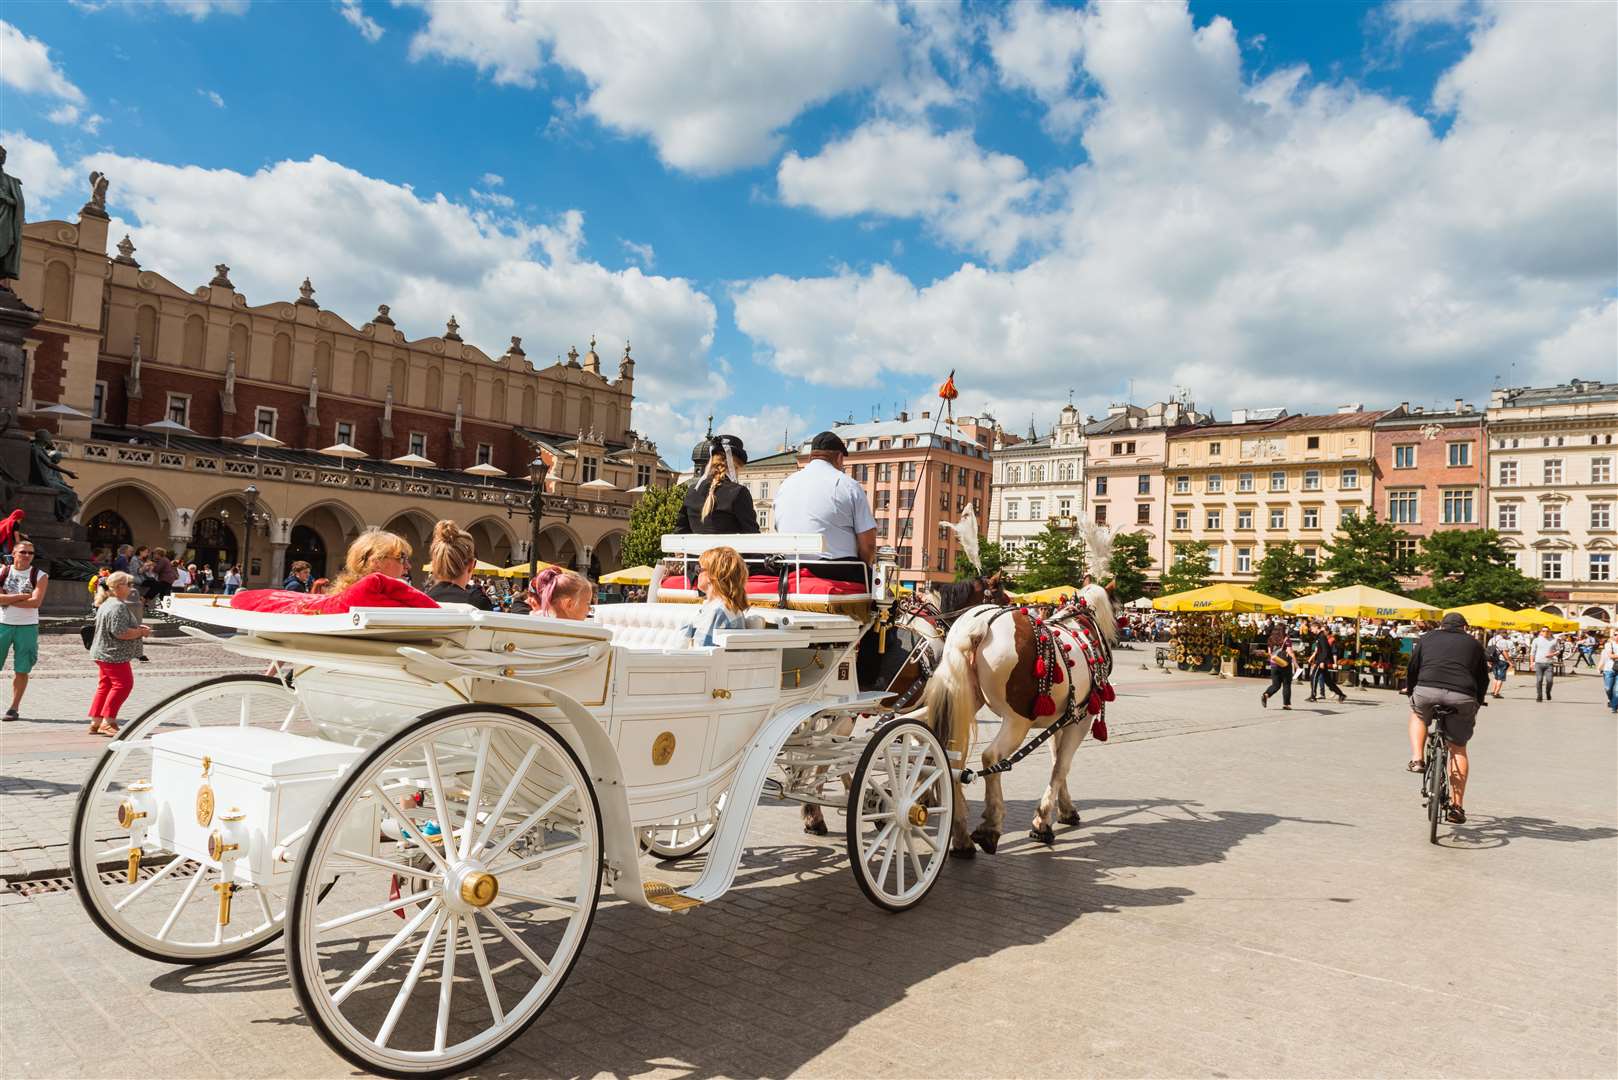 Krakow in Poland was ranked behind Athens and Lisbon in the ranking (Tetyana Kochneva/Alamy/PA)